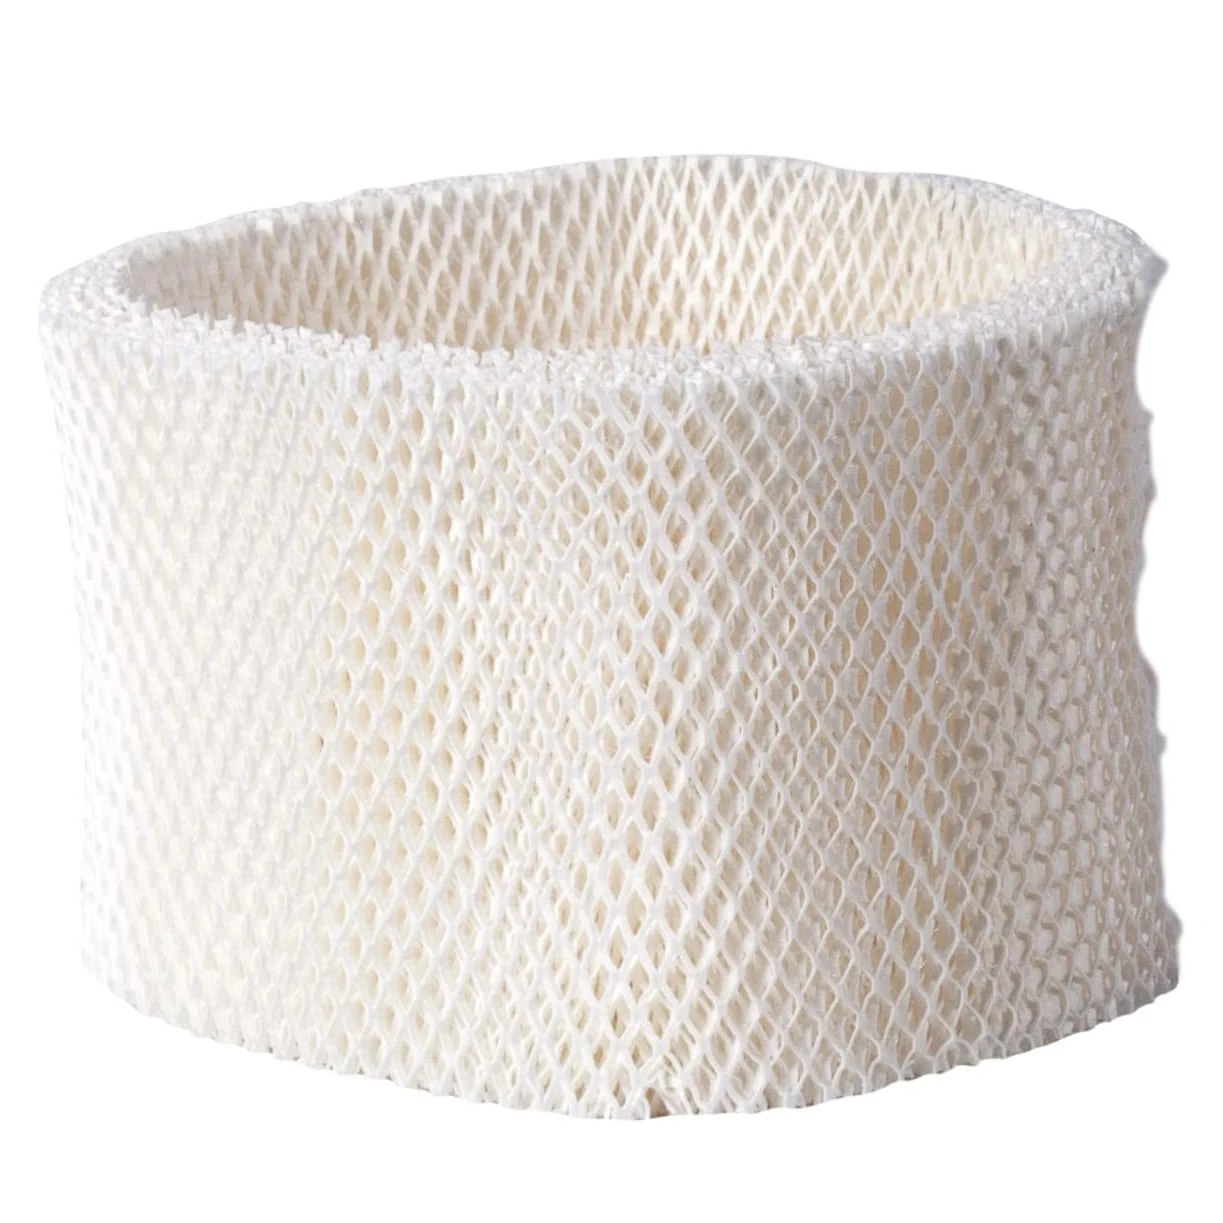 Replacement Humidifier Filter Compatible with BONECO Evaporator Mat A7018